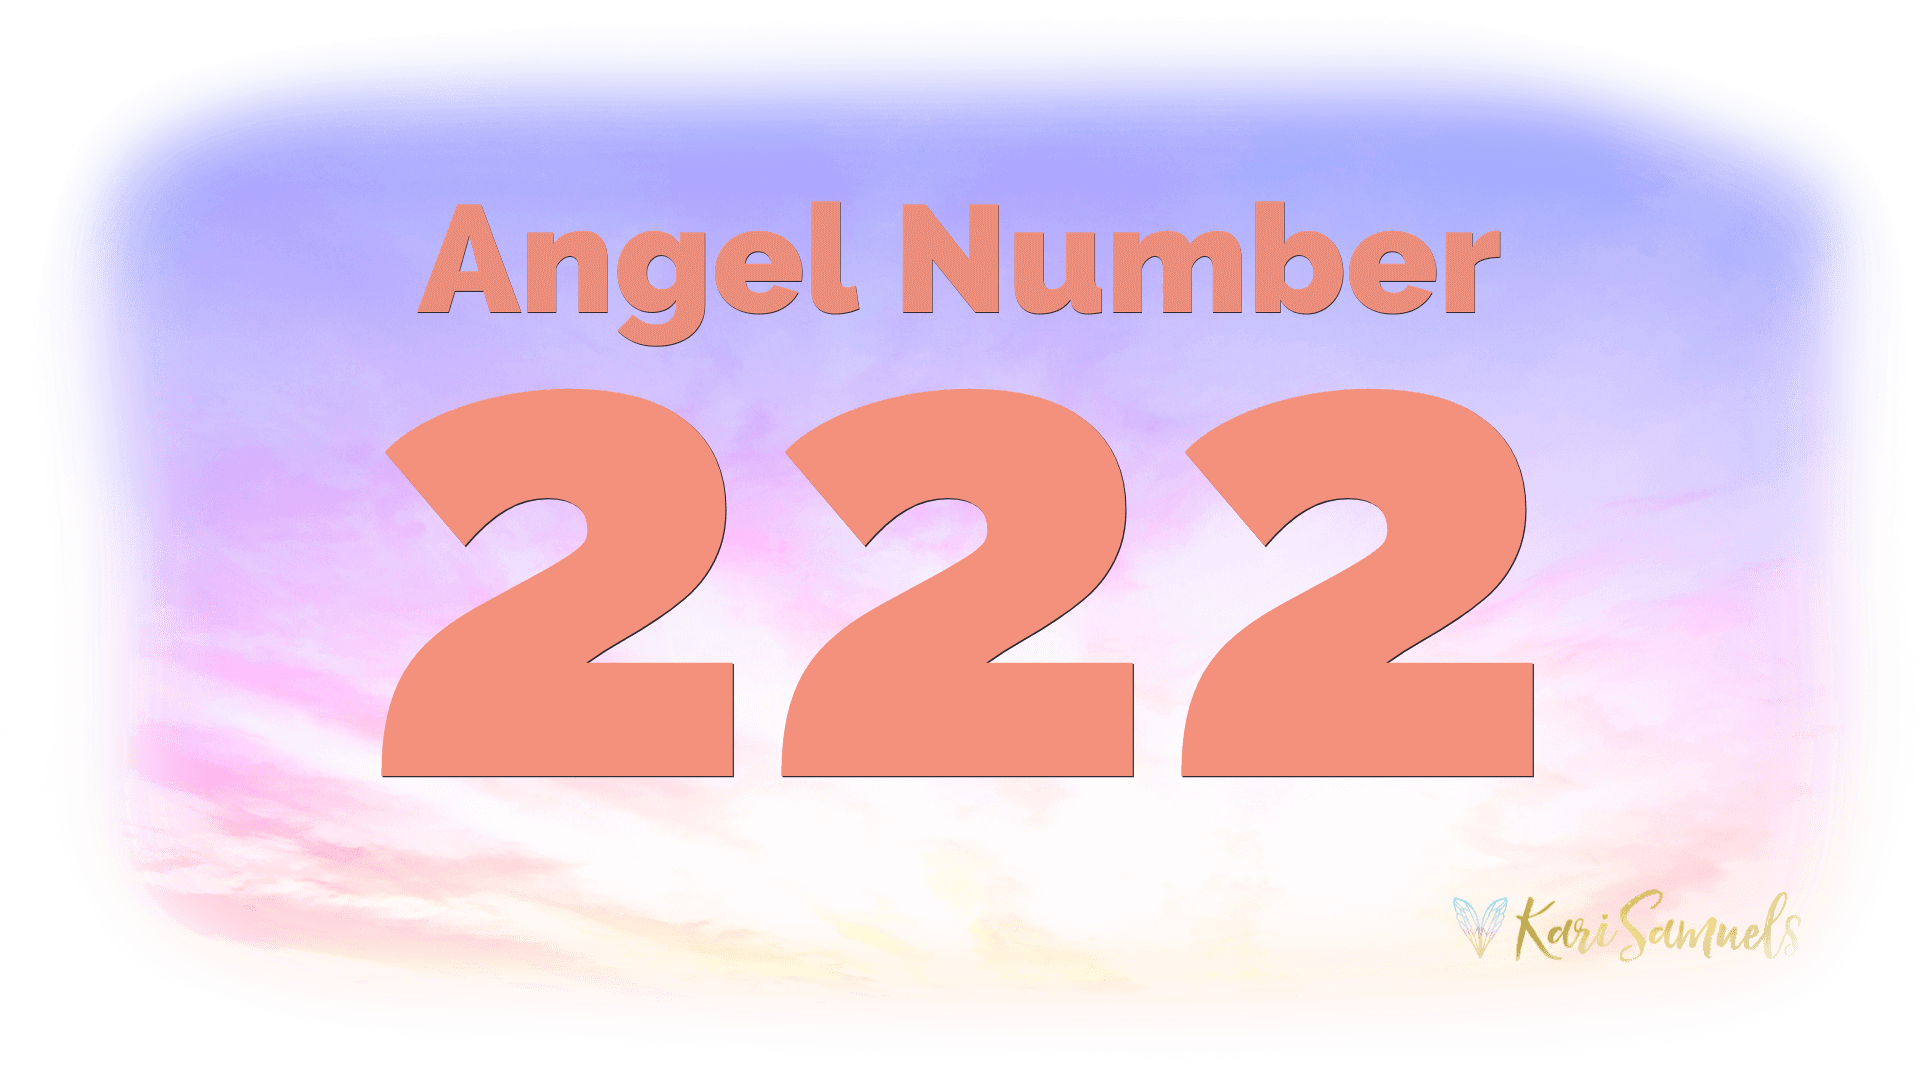 Angel number 222 in sunset background.